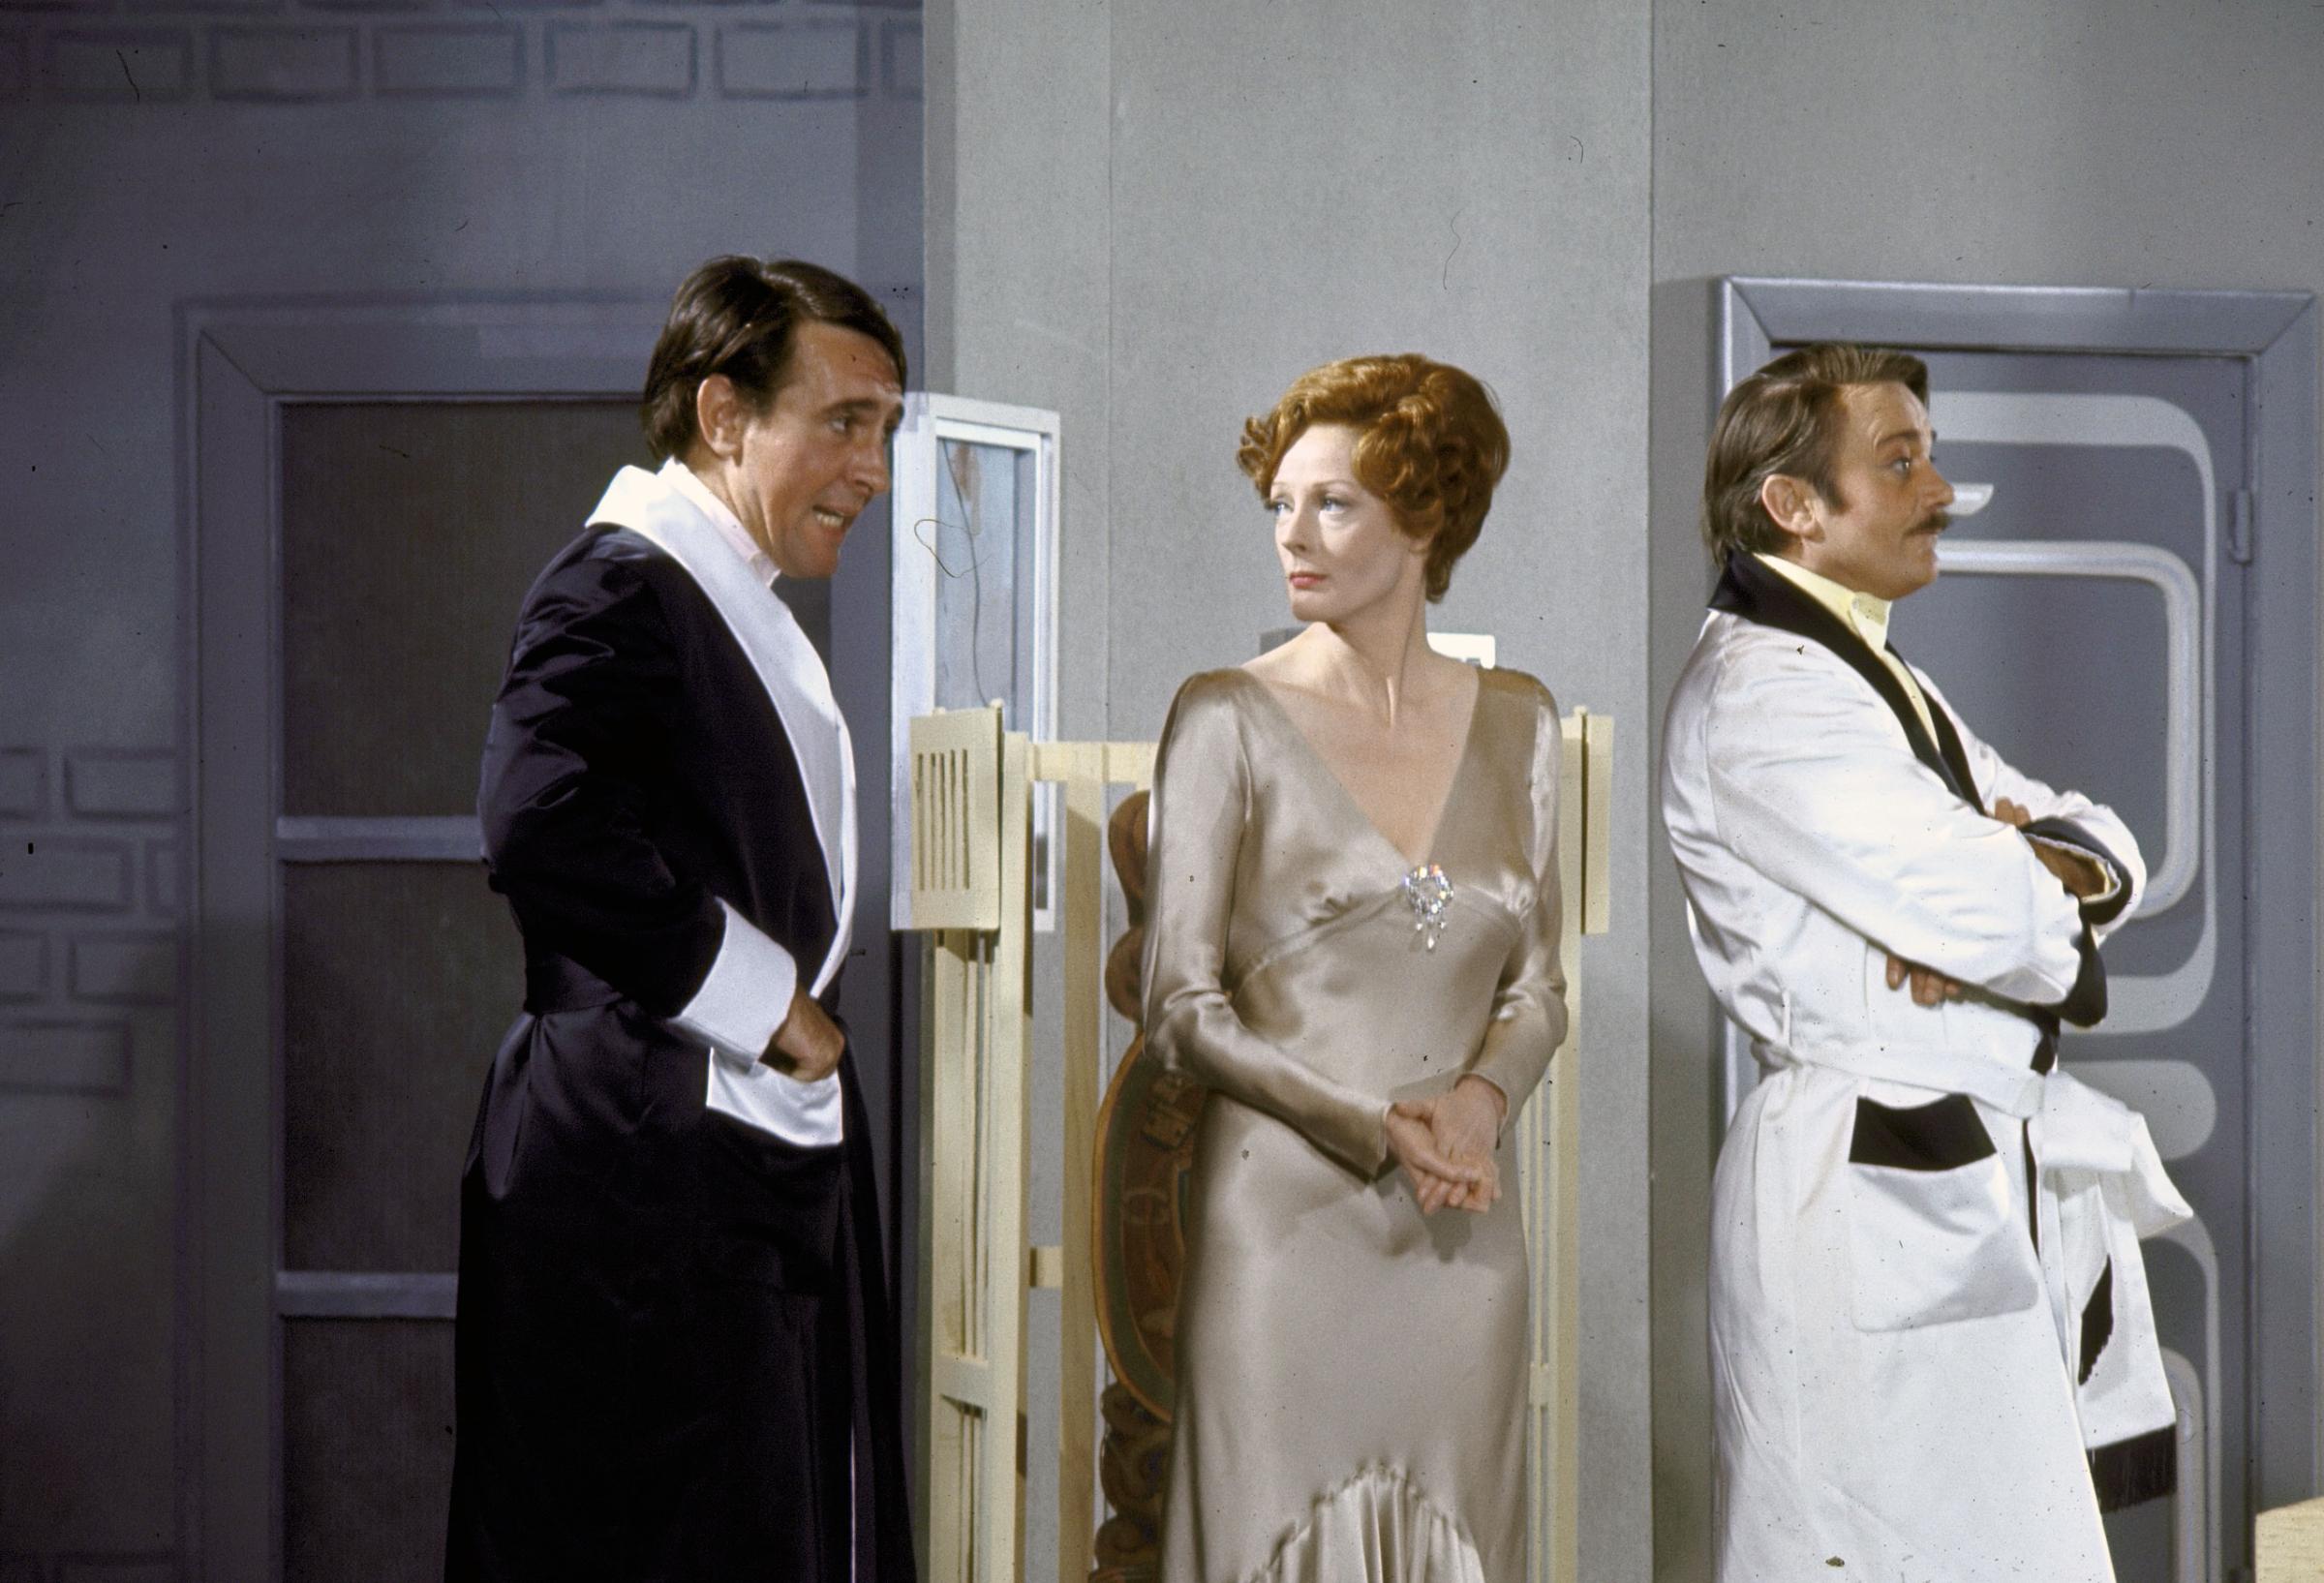 Denholm Elliott, Maggie Smith and Robert Stephens in a scene from the play Design for Living at the Ahmanson Theatre.